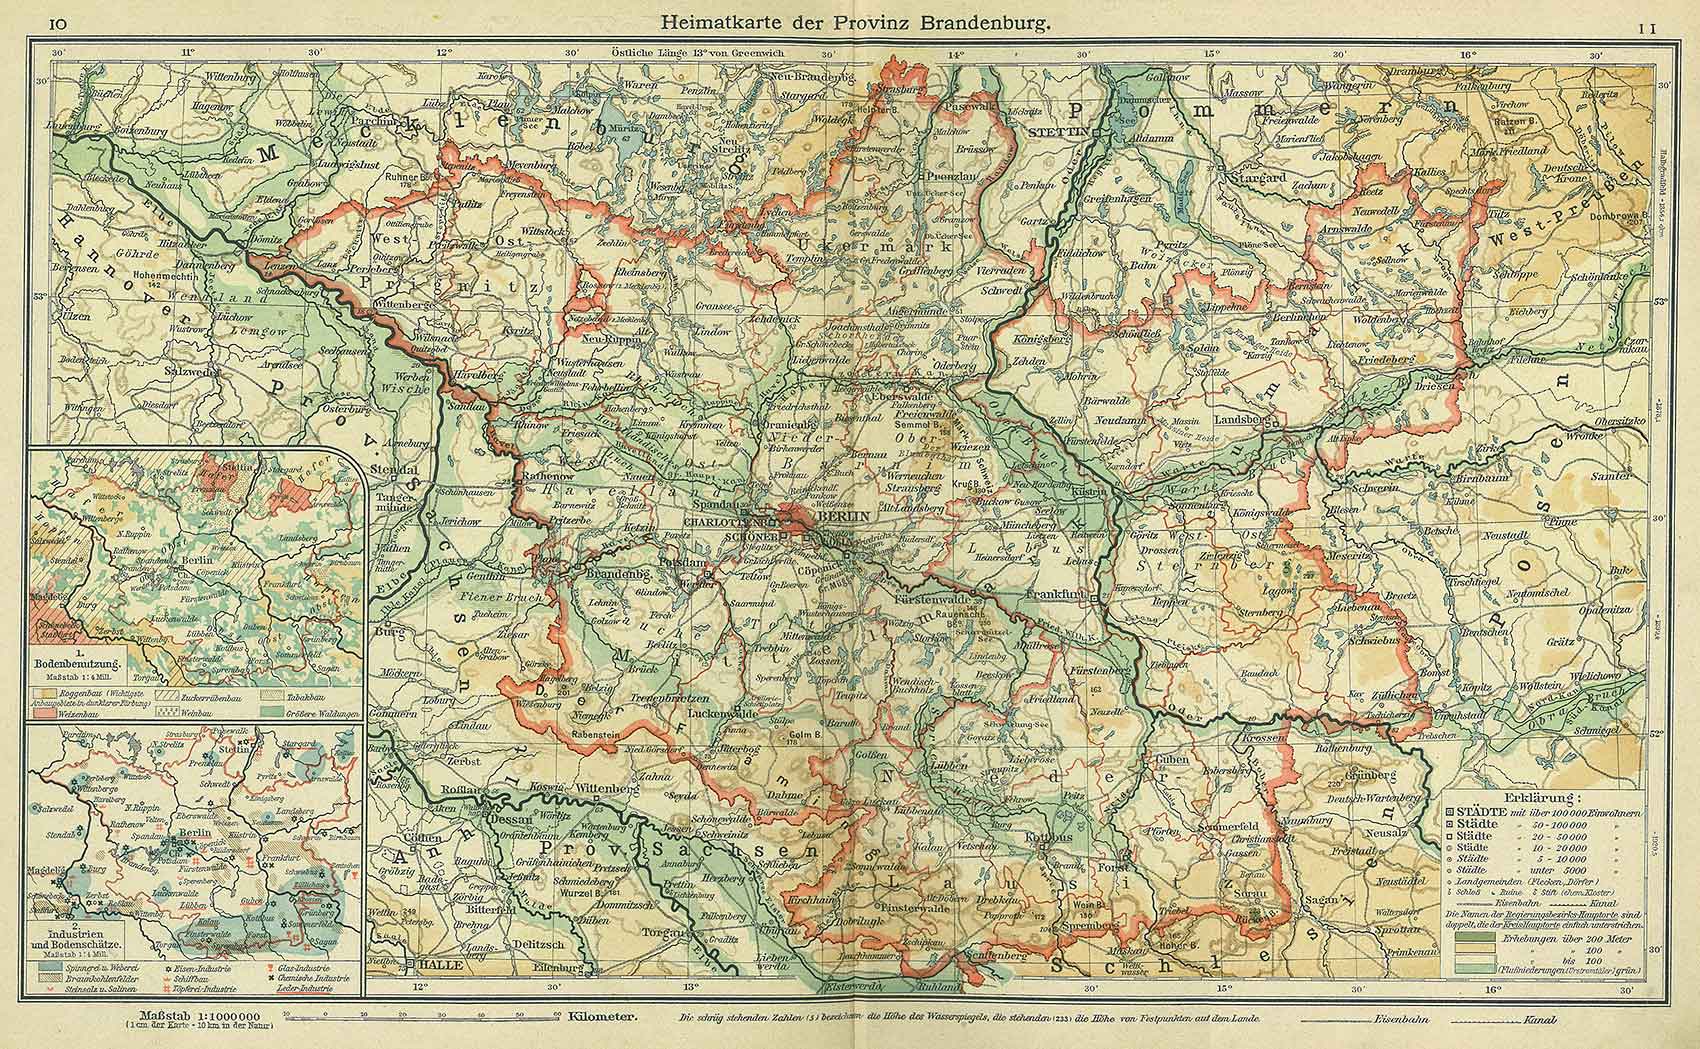 Province of Brandenburg, Andrees 'Berliner Schul-Atlas', 1916, pages 10 to 11, published size to print borders 42.95 cm wide by 26.19 cm high.